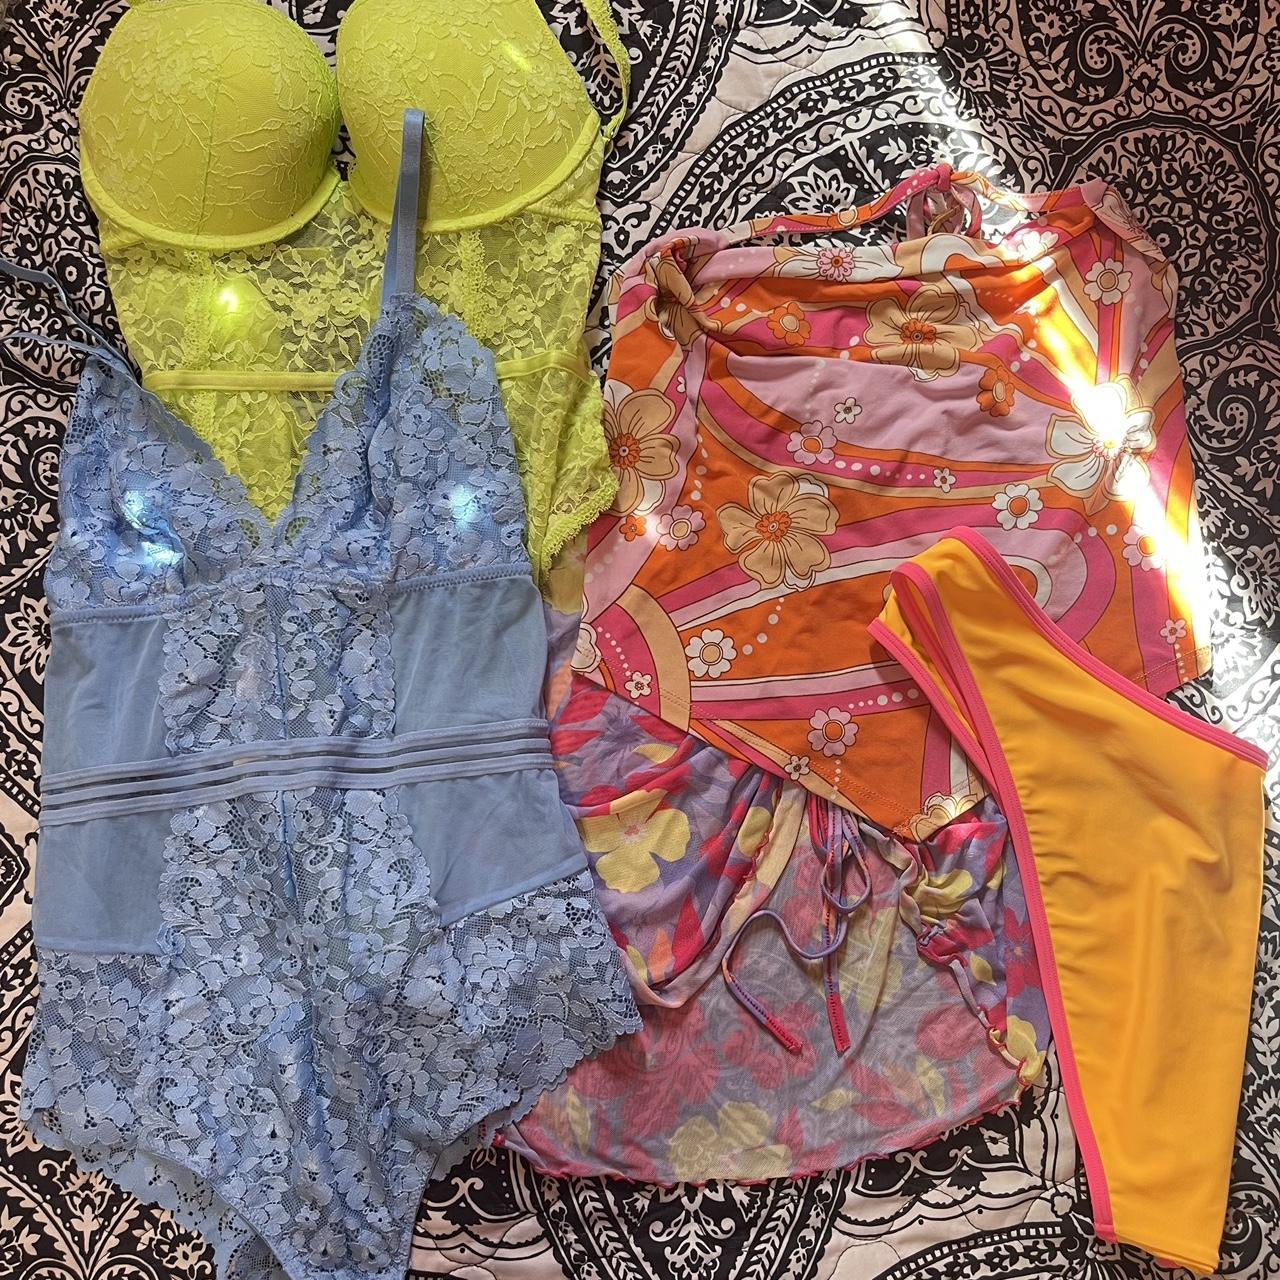 Find Out Where To Get The Pants  Neon outfits, Neon fashion, Cute